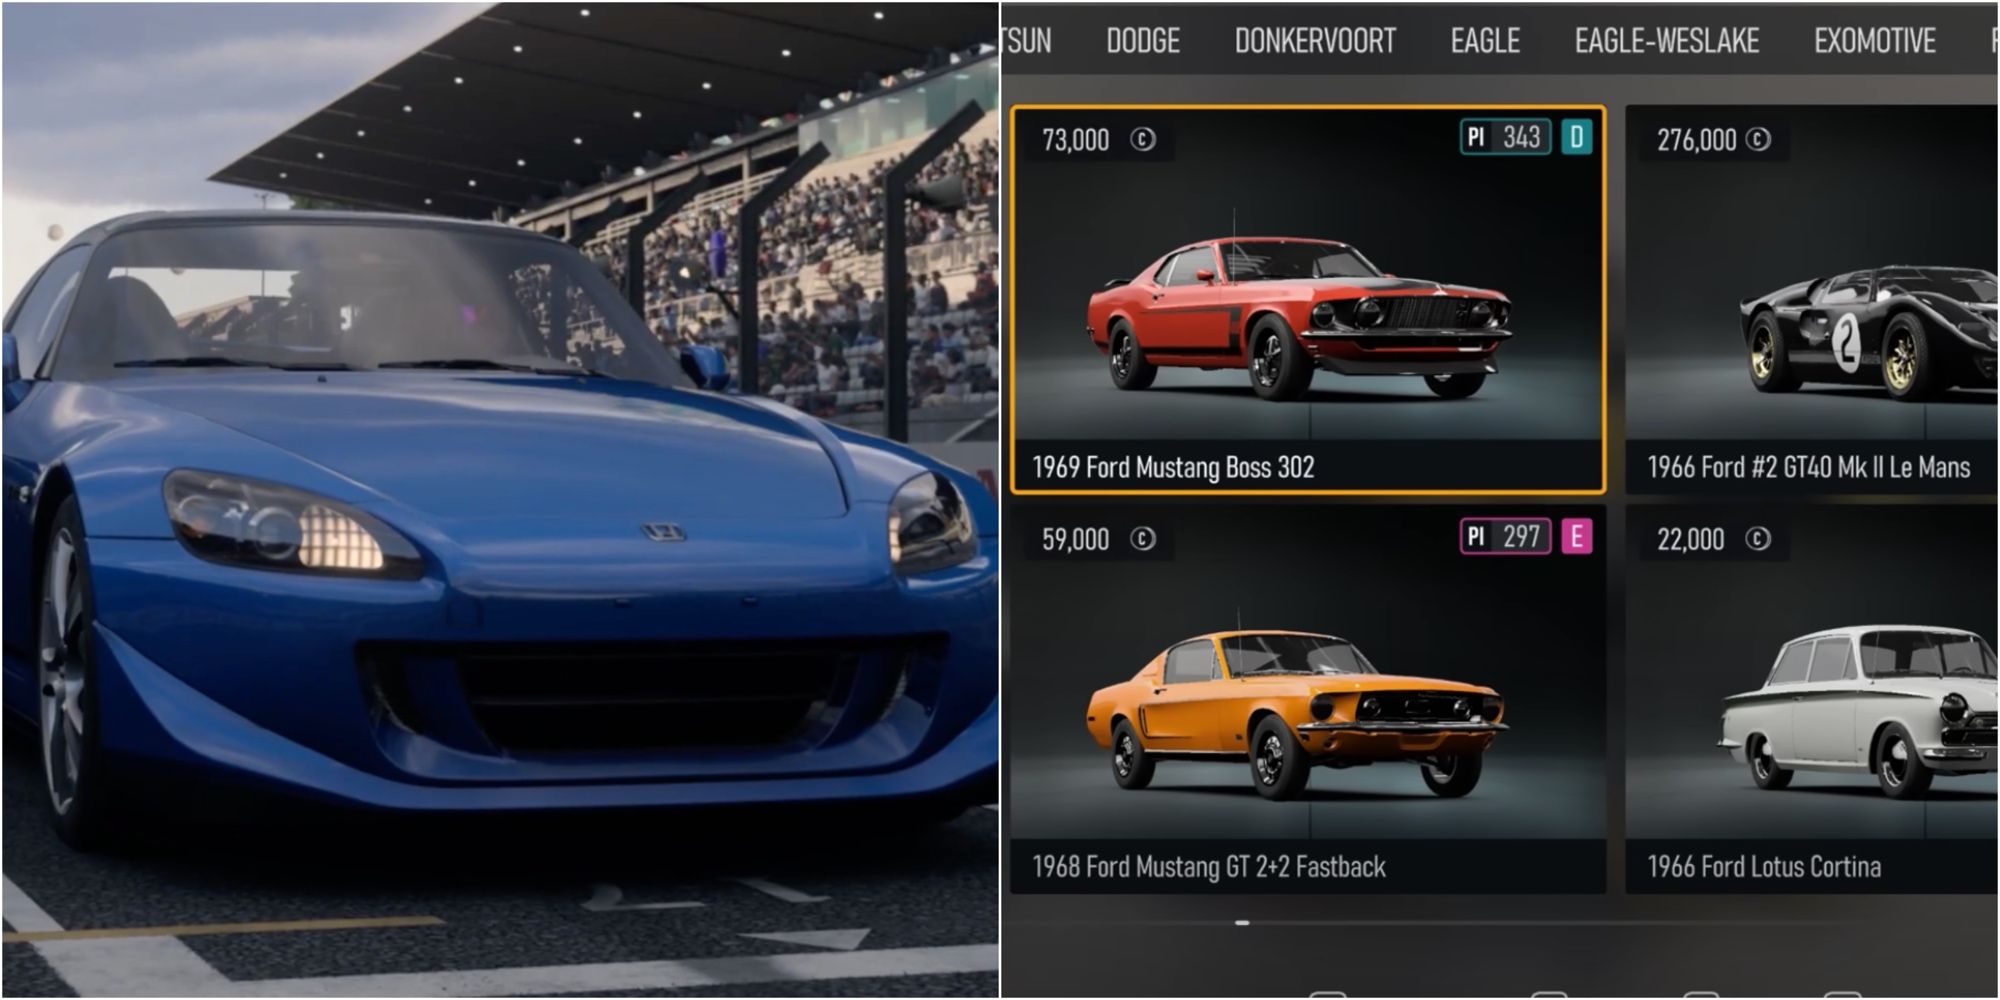 Blue Car With Car Selection Screen on The Right